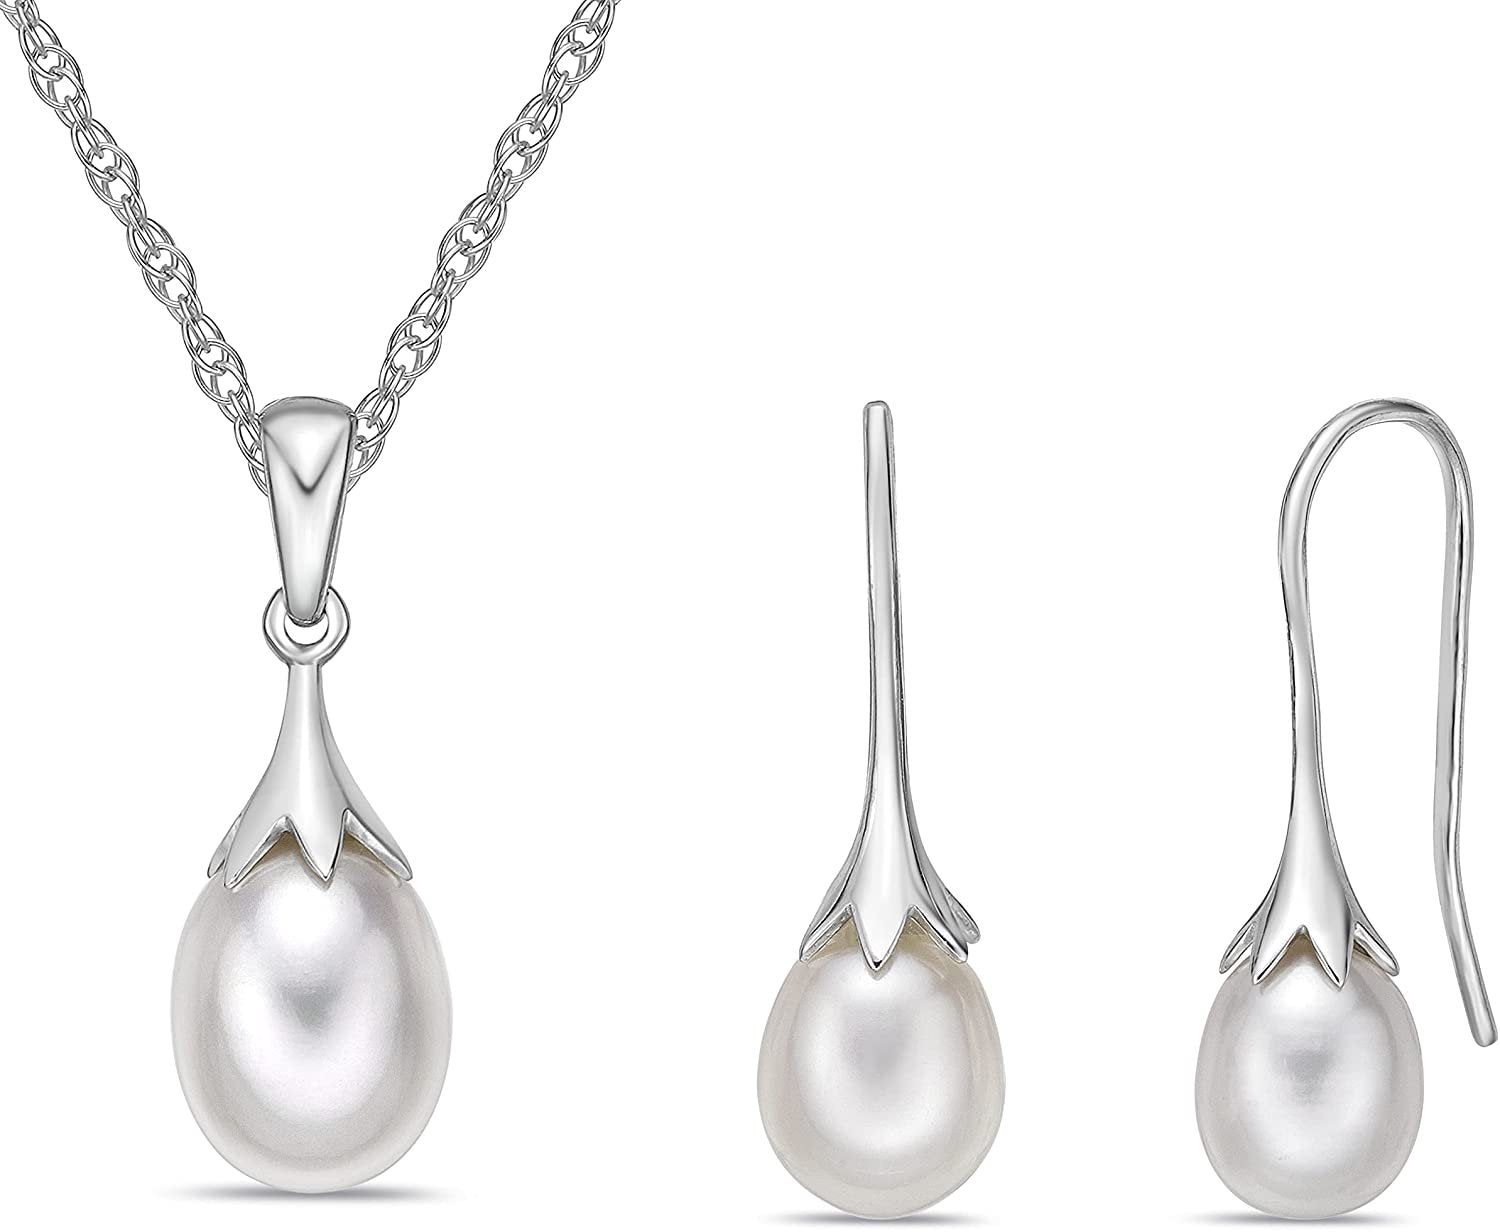 .925 Sterling Silver Freshwater Cultured Pearl Elegant Drop Pendant Necklace on 18" Rope Chain & Freshwater Cultured Pearl Drop Earrings